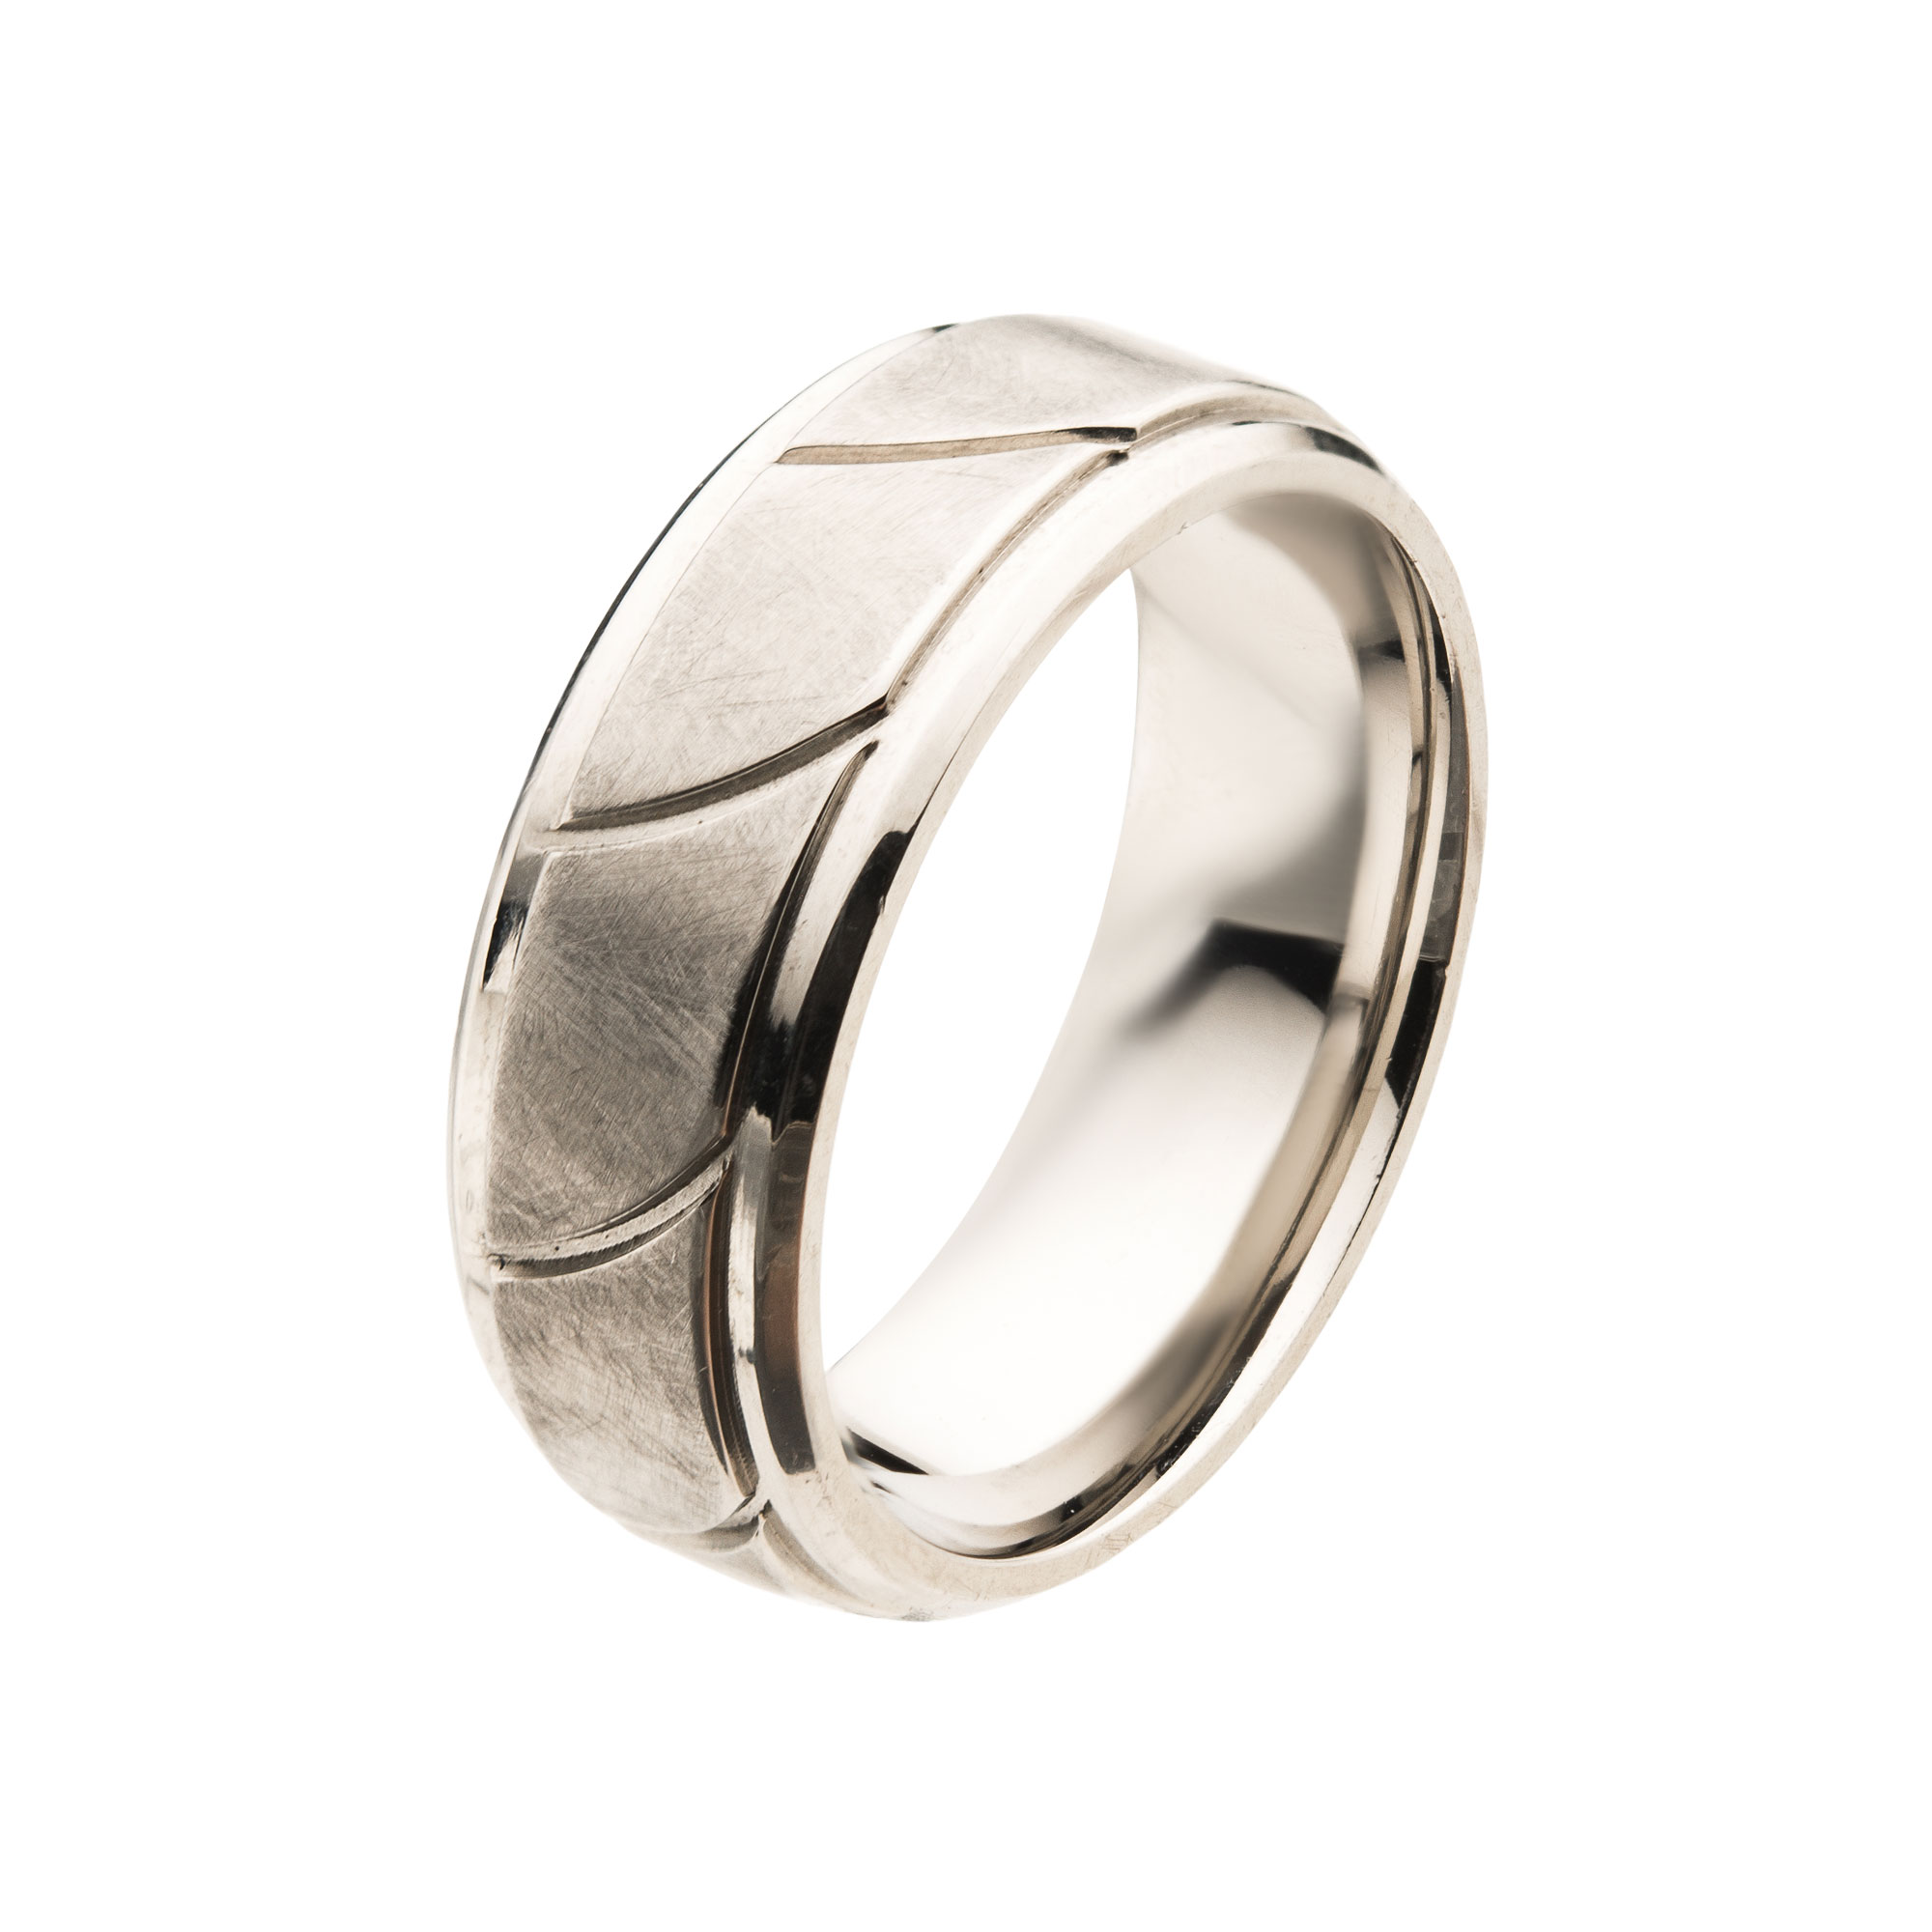 Steel Brushed with Grooves Beveled Ring Midtown Diamonds Reno, NV